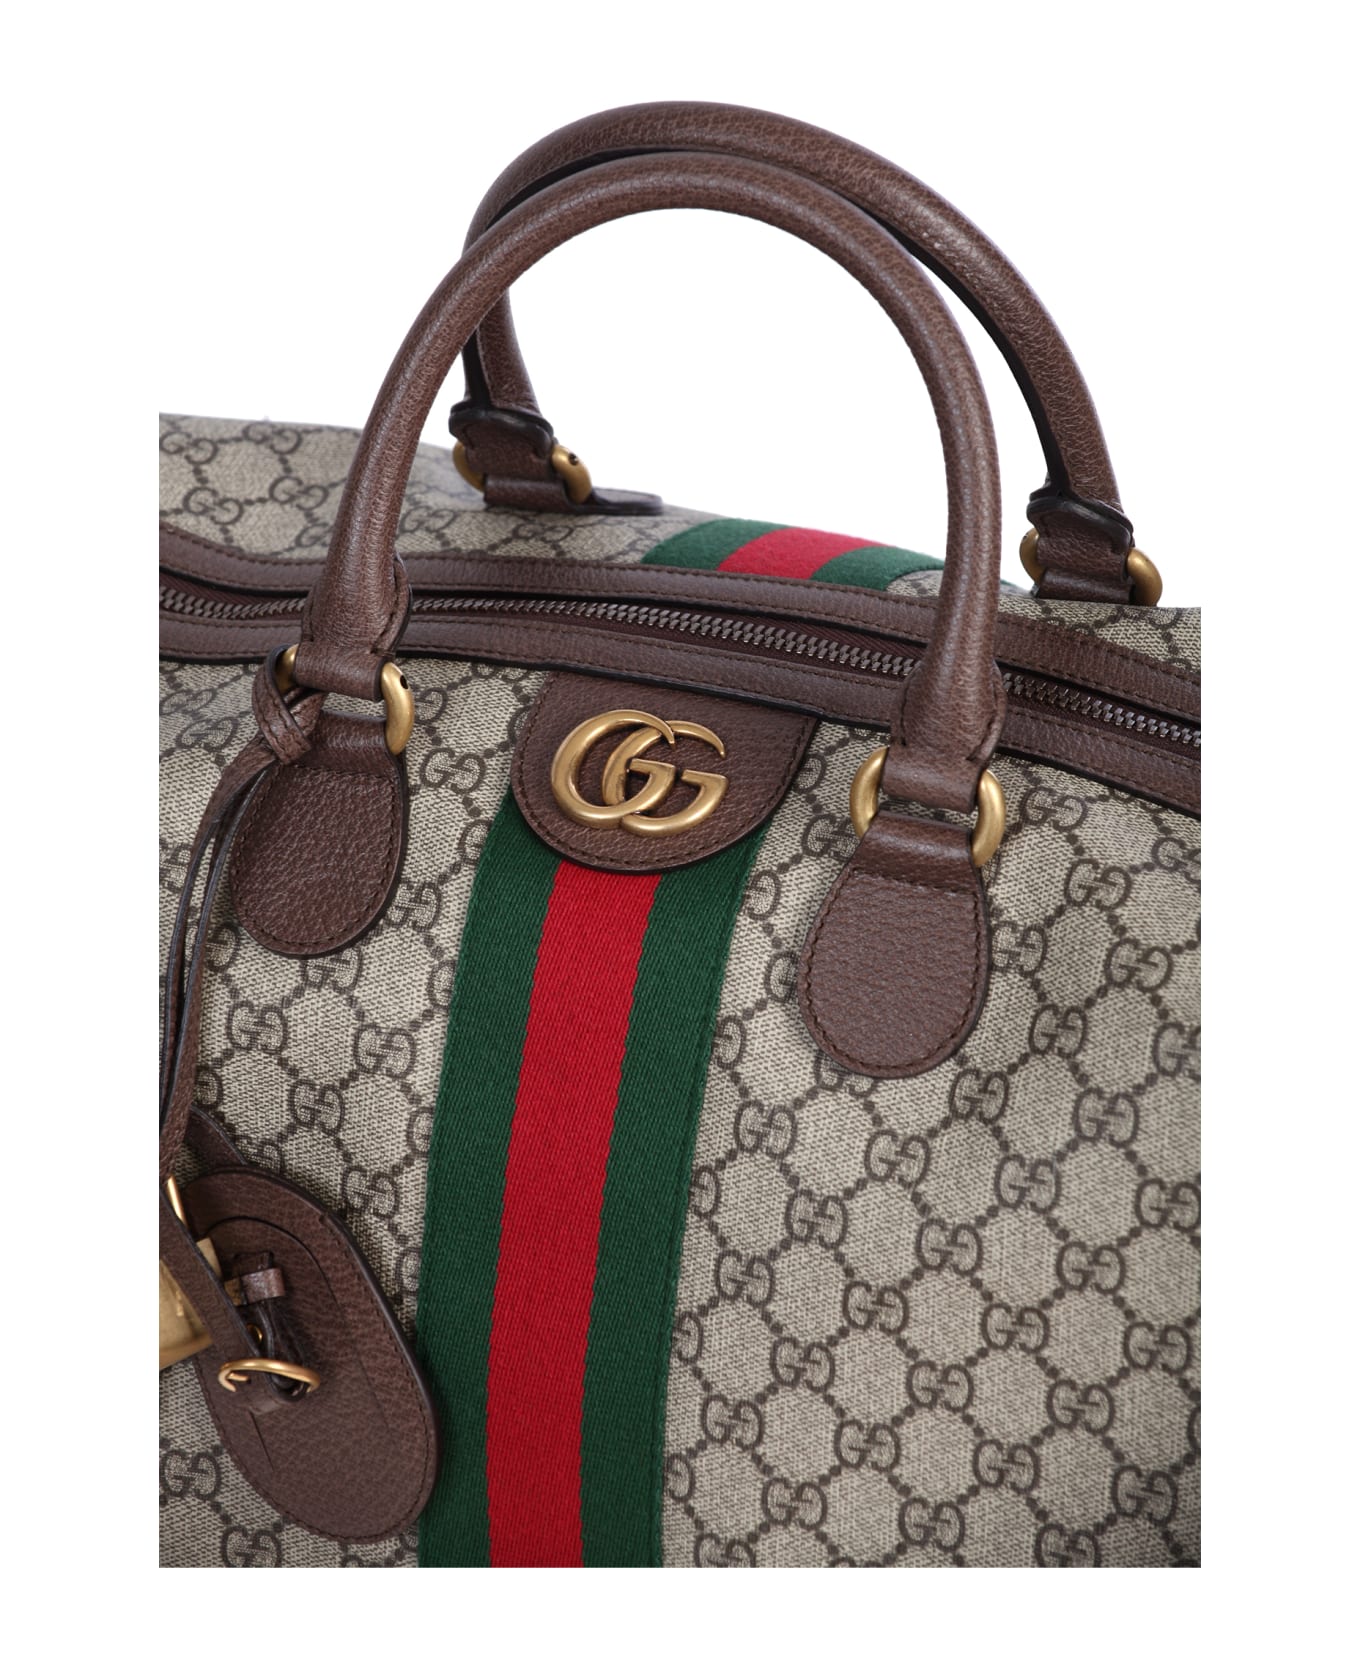 Gucci Ophidia travel bag | italist